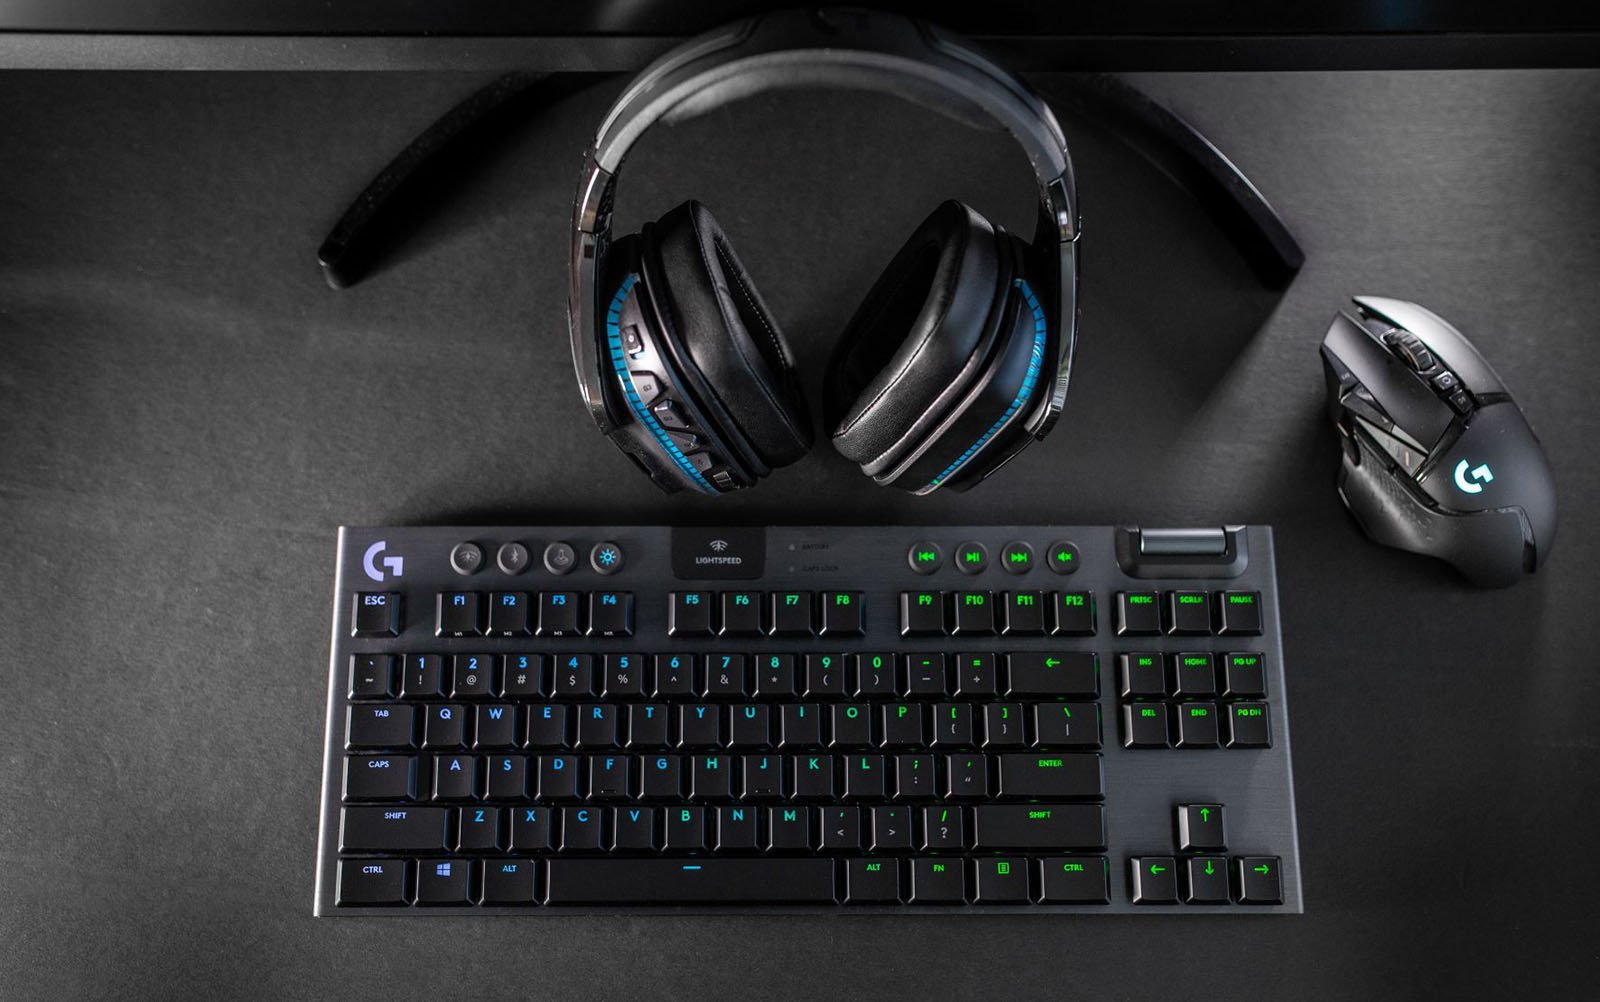 The Logitech G915 gaming keyboard is seen on a desk with a mouse and a pair of headphones.